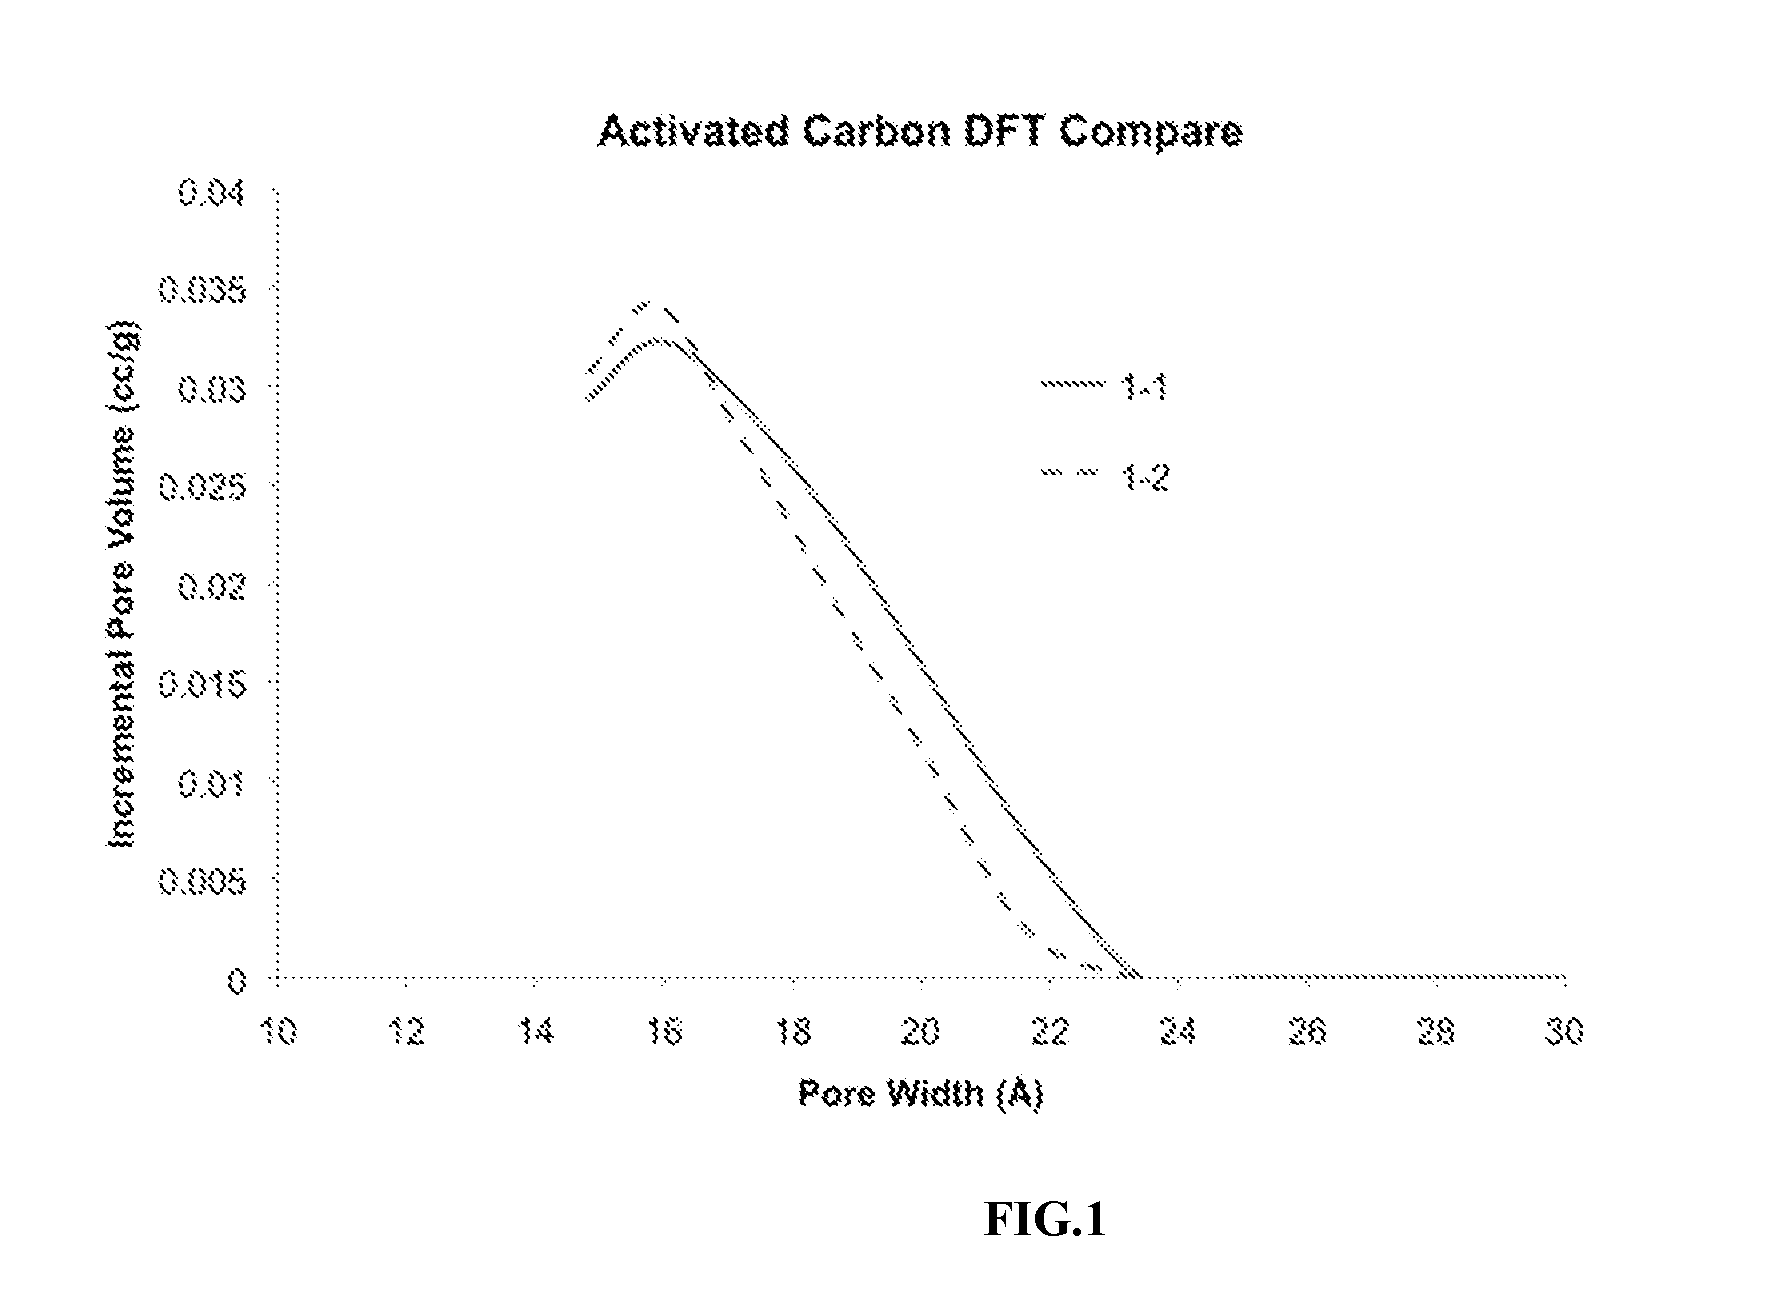 Improved emulsion and suspension polymerization processes, and improved electrochemical performance for carbon derived from same